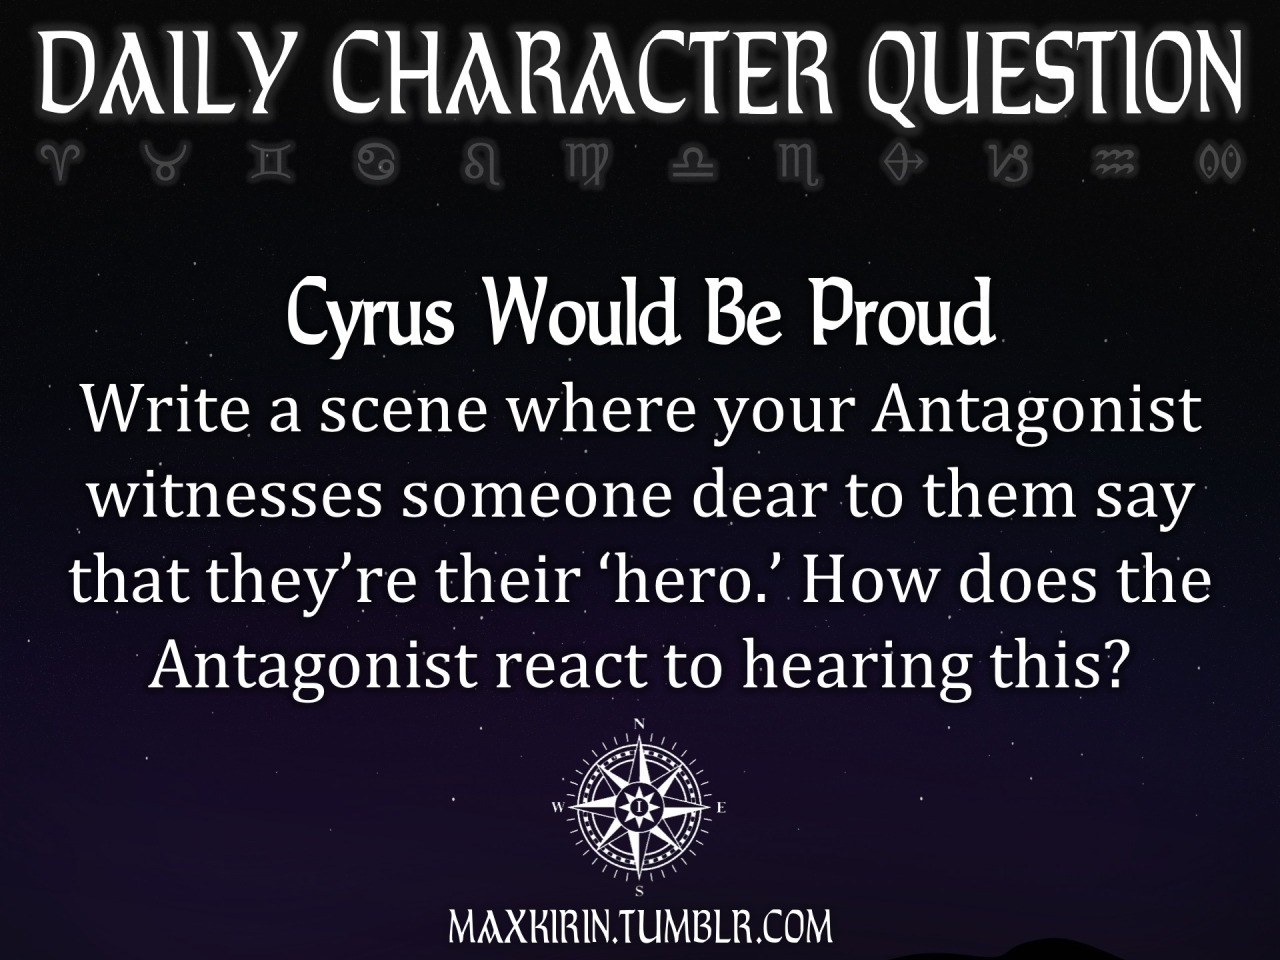 ✶ DAILY CHARACTER QUESTION ✶
“ Cyrus Would Be Proud
Write a scene where your Antagonist witnesses someone dear to them say that they’re their ‘hero.’ How does the Antagonist react to hearing this?
”
Want to publish a story inspired by this prompt?...